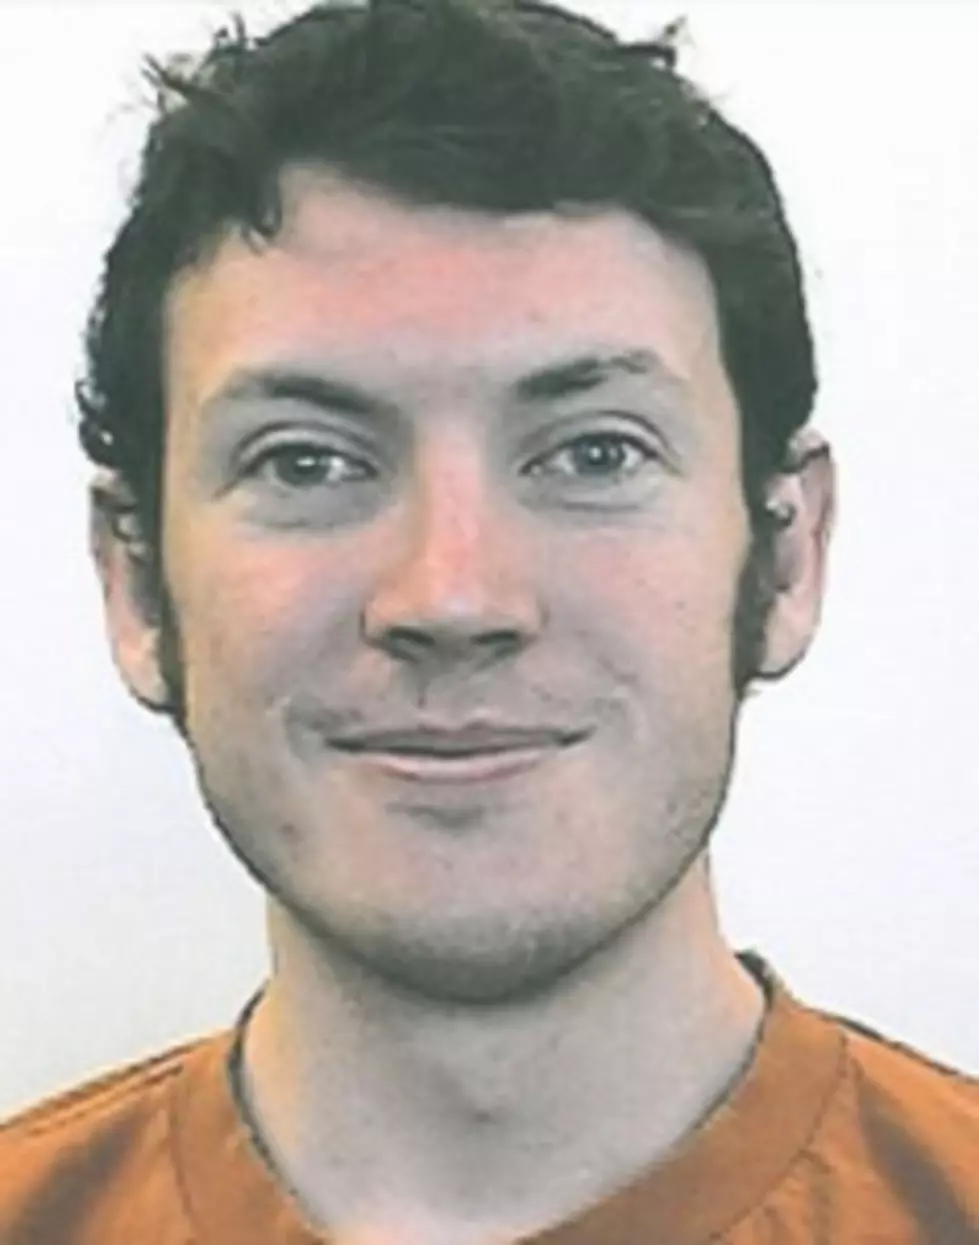 First Picture of &#8216;Dark Knight Rises&#8217; Shooting Suspect Released